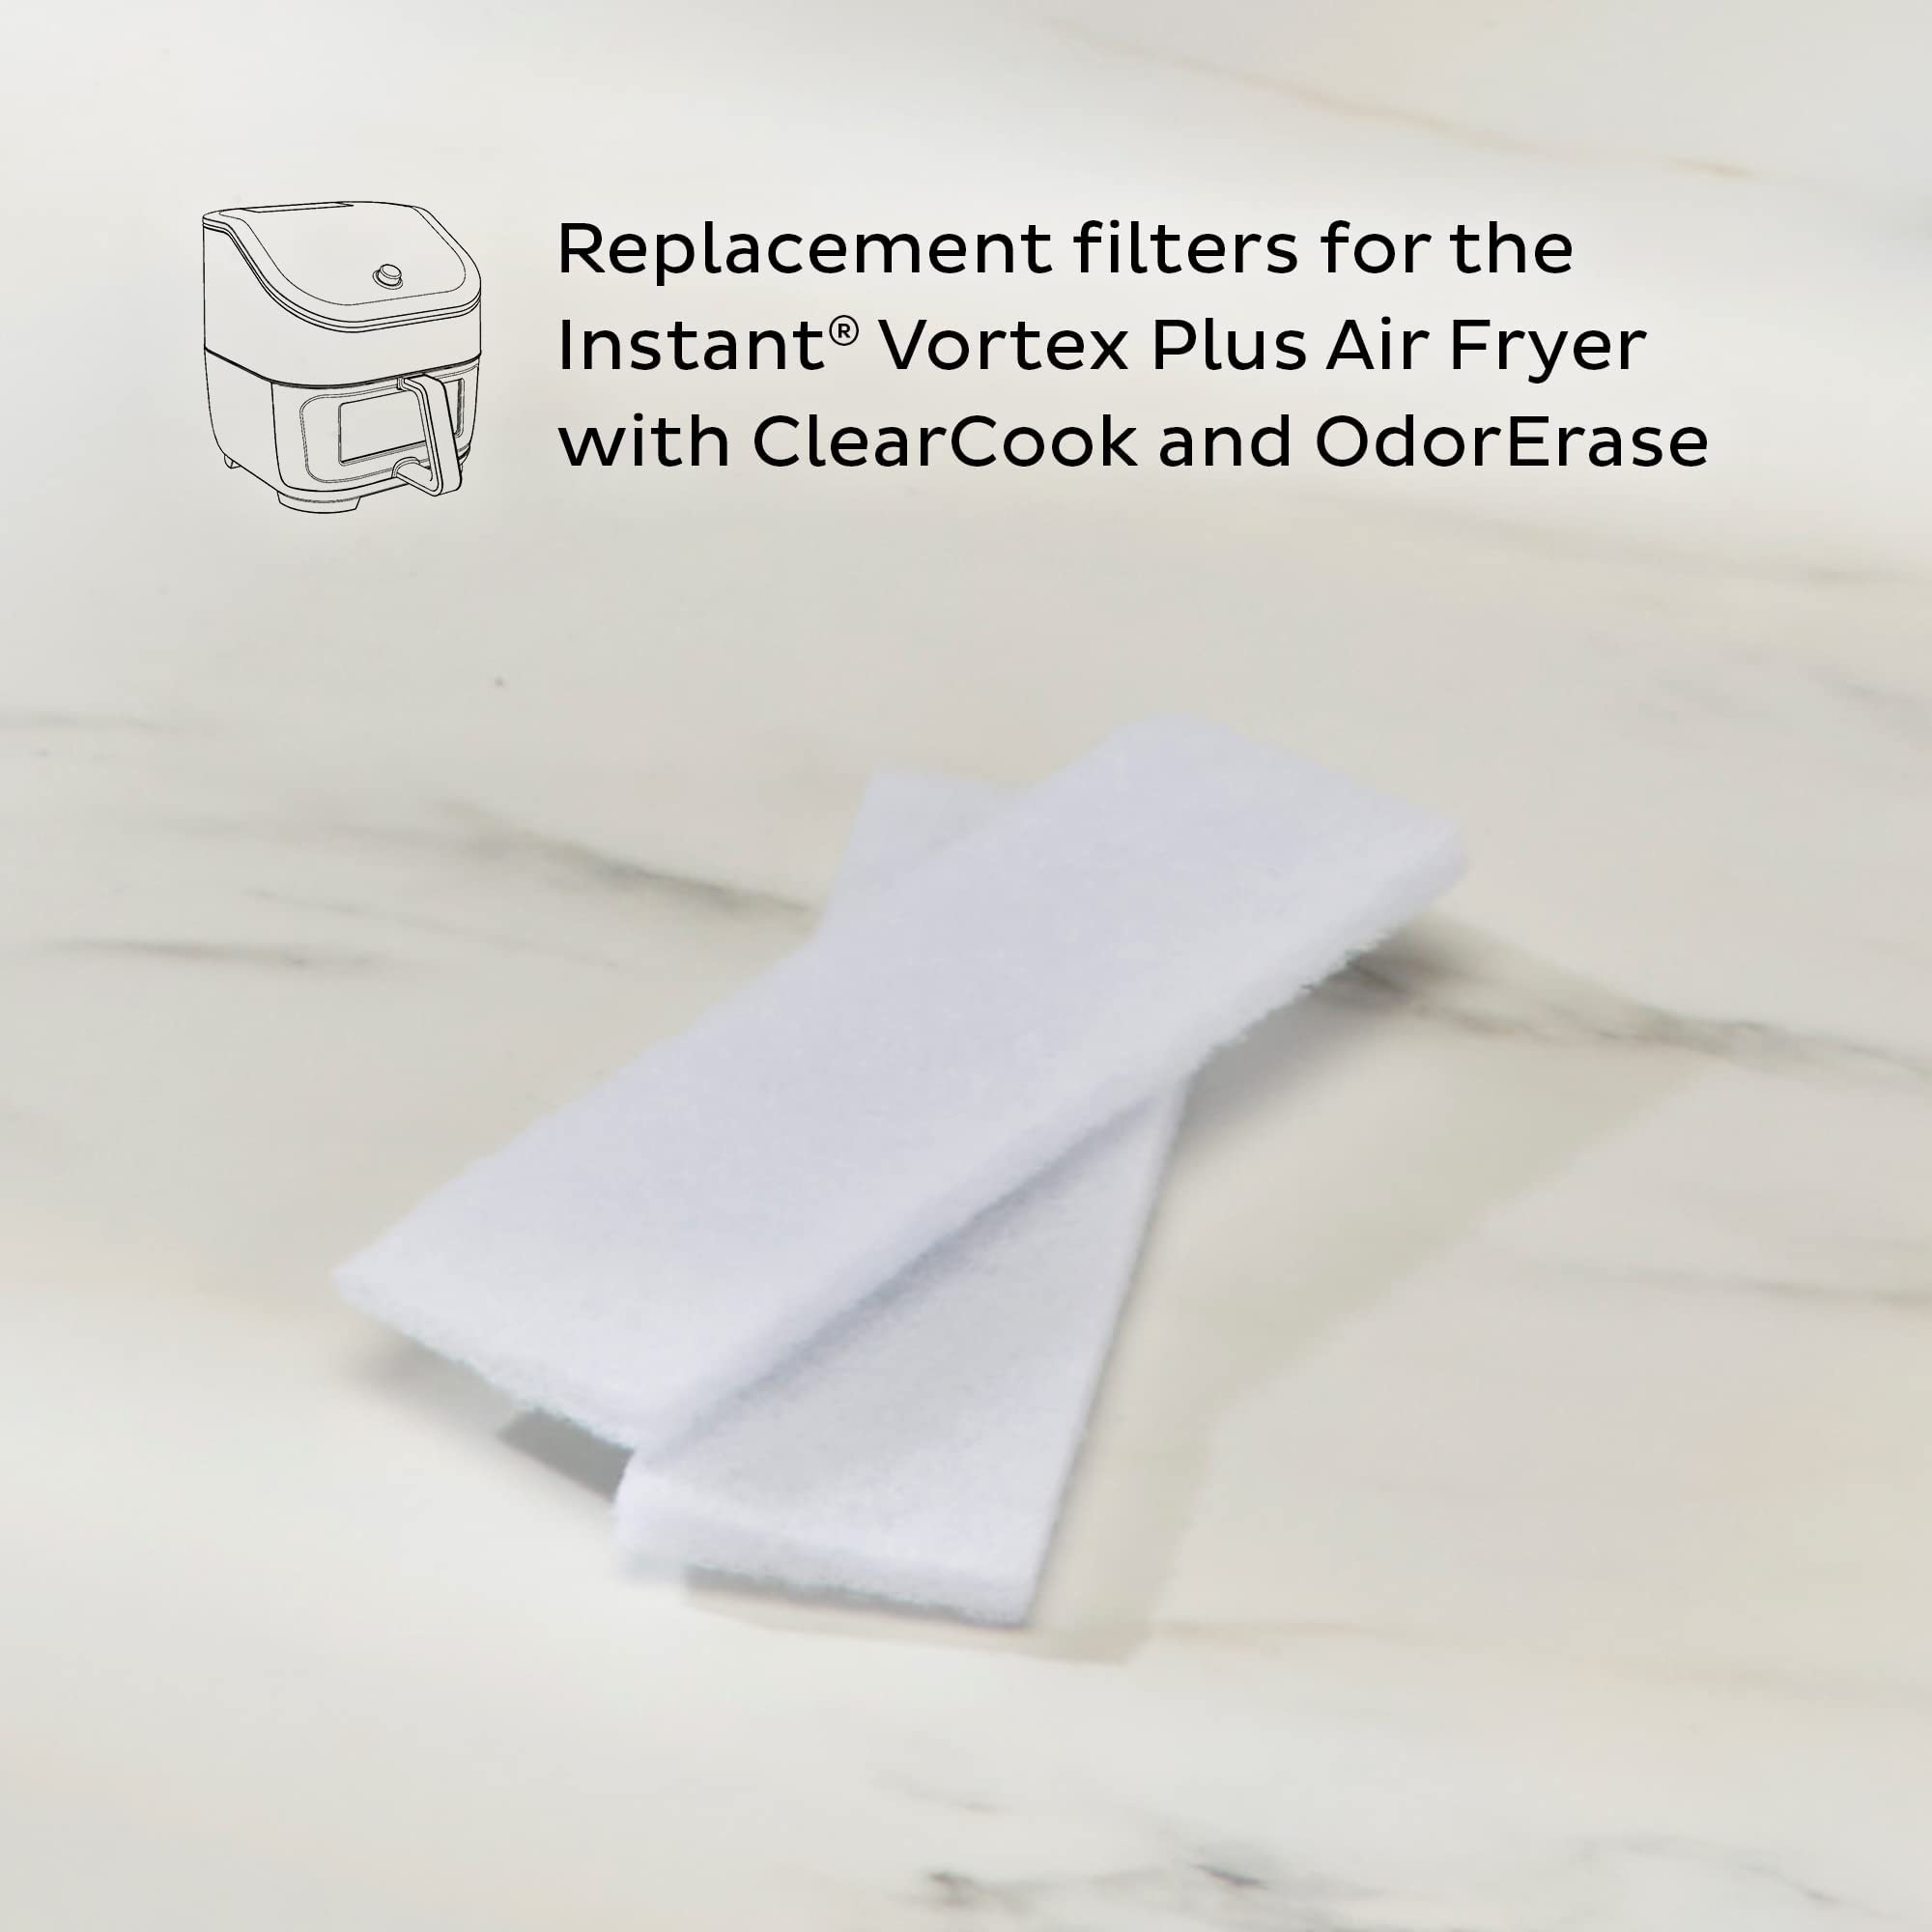 Replacement Filter for 6QT vortex Plus air fryer with ClearCook and OdorErase, From the Makers of instant Pot